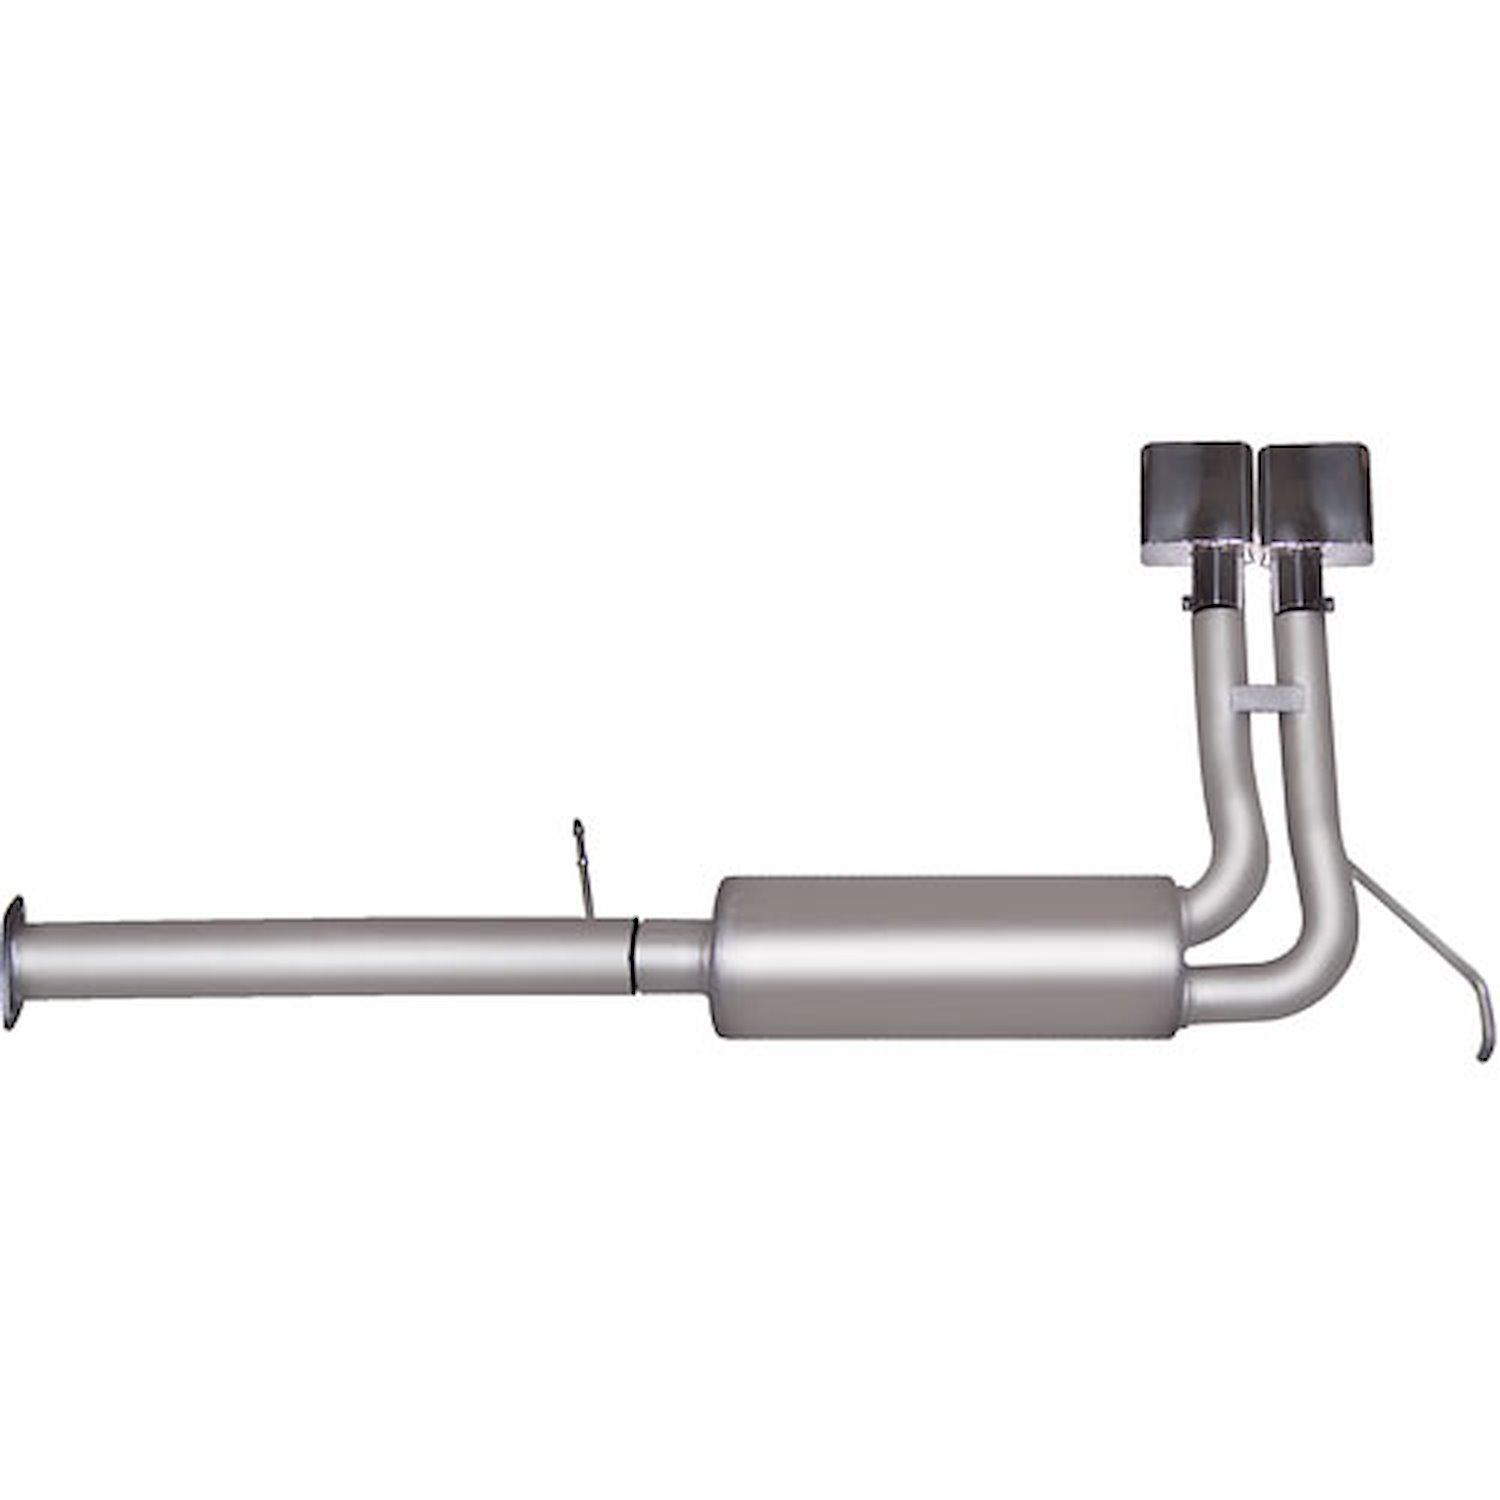 Super Truck Stainless Steel Cat-Back Exhaust 1996-99 GM C/K 1500 Truck 2WD/4WD 4.3L/5.0L